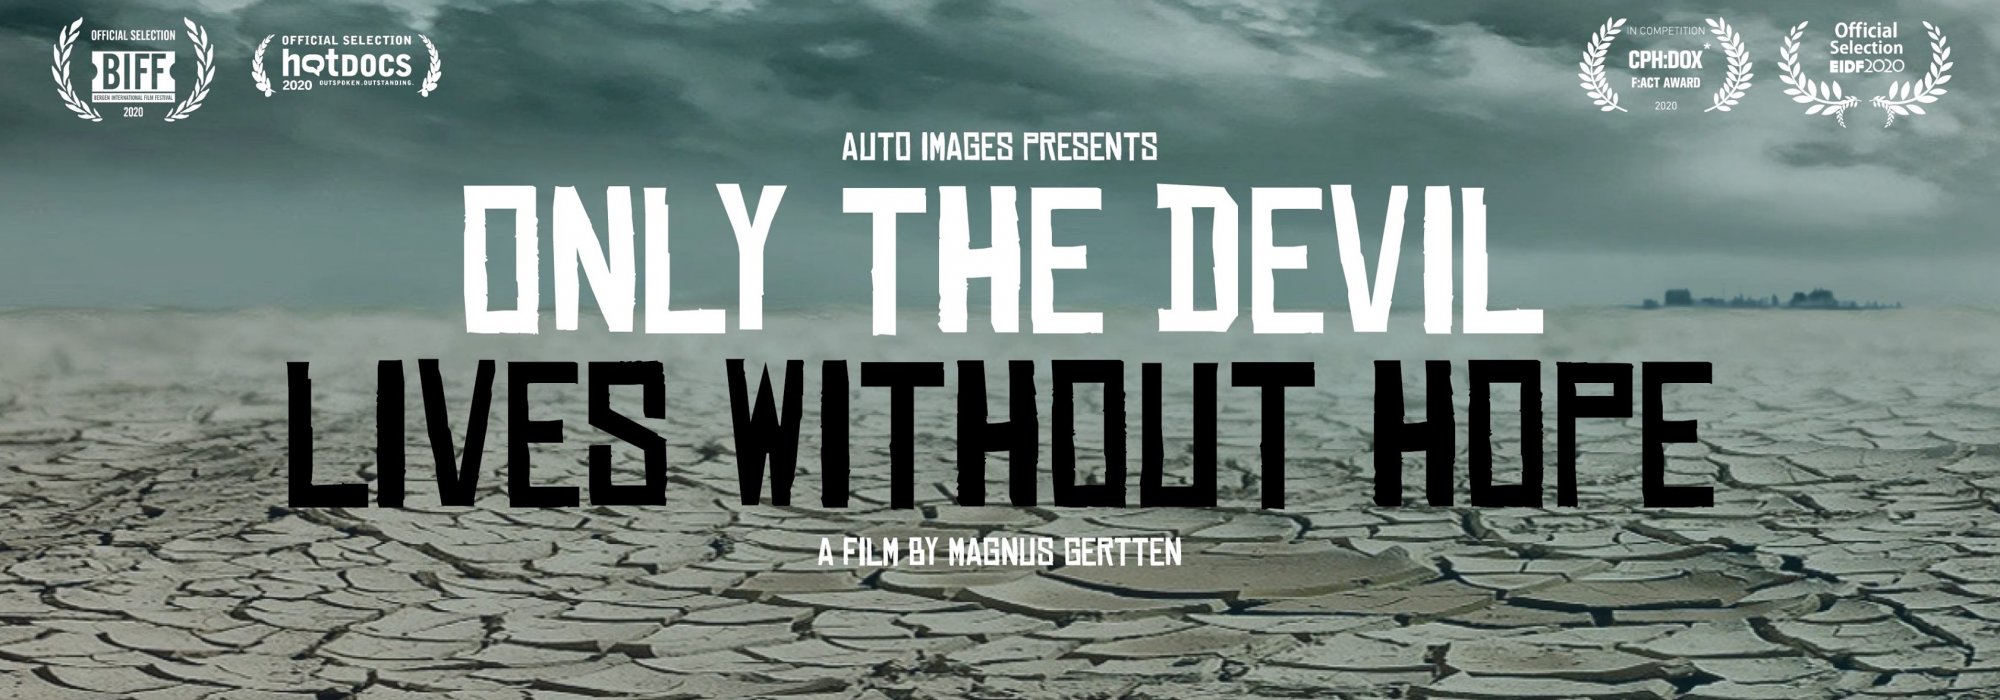 Auto Images presents "Only the Devil Lives without Hope". A film by Magnus Gertten.